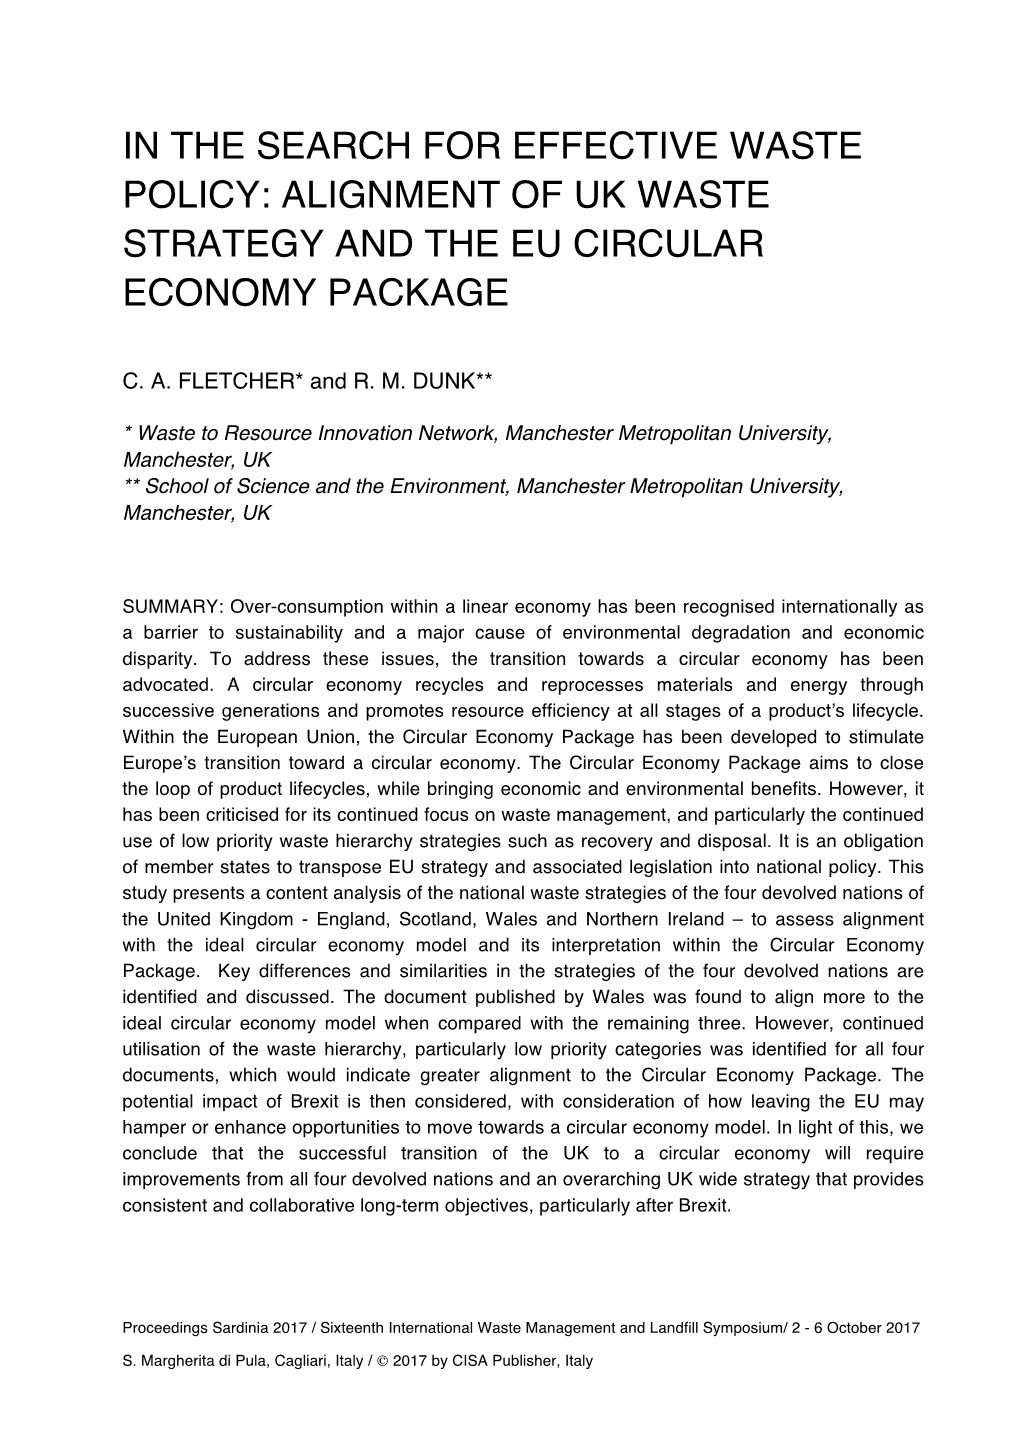 Alignment of Uk Waste Strategy and the Eu Circular Economy Package